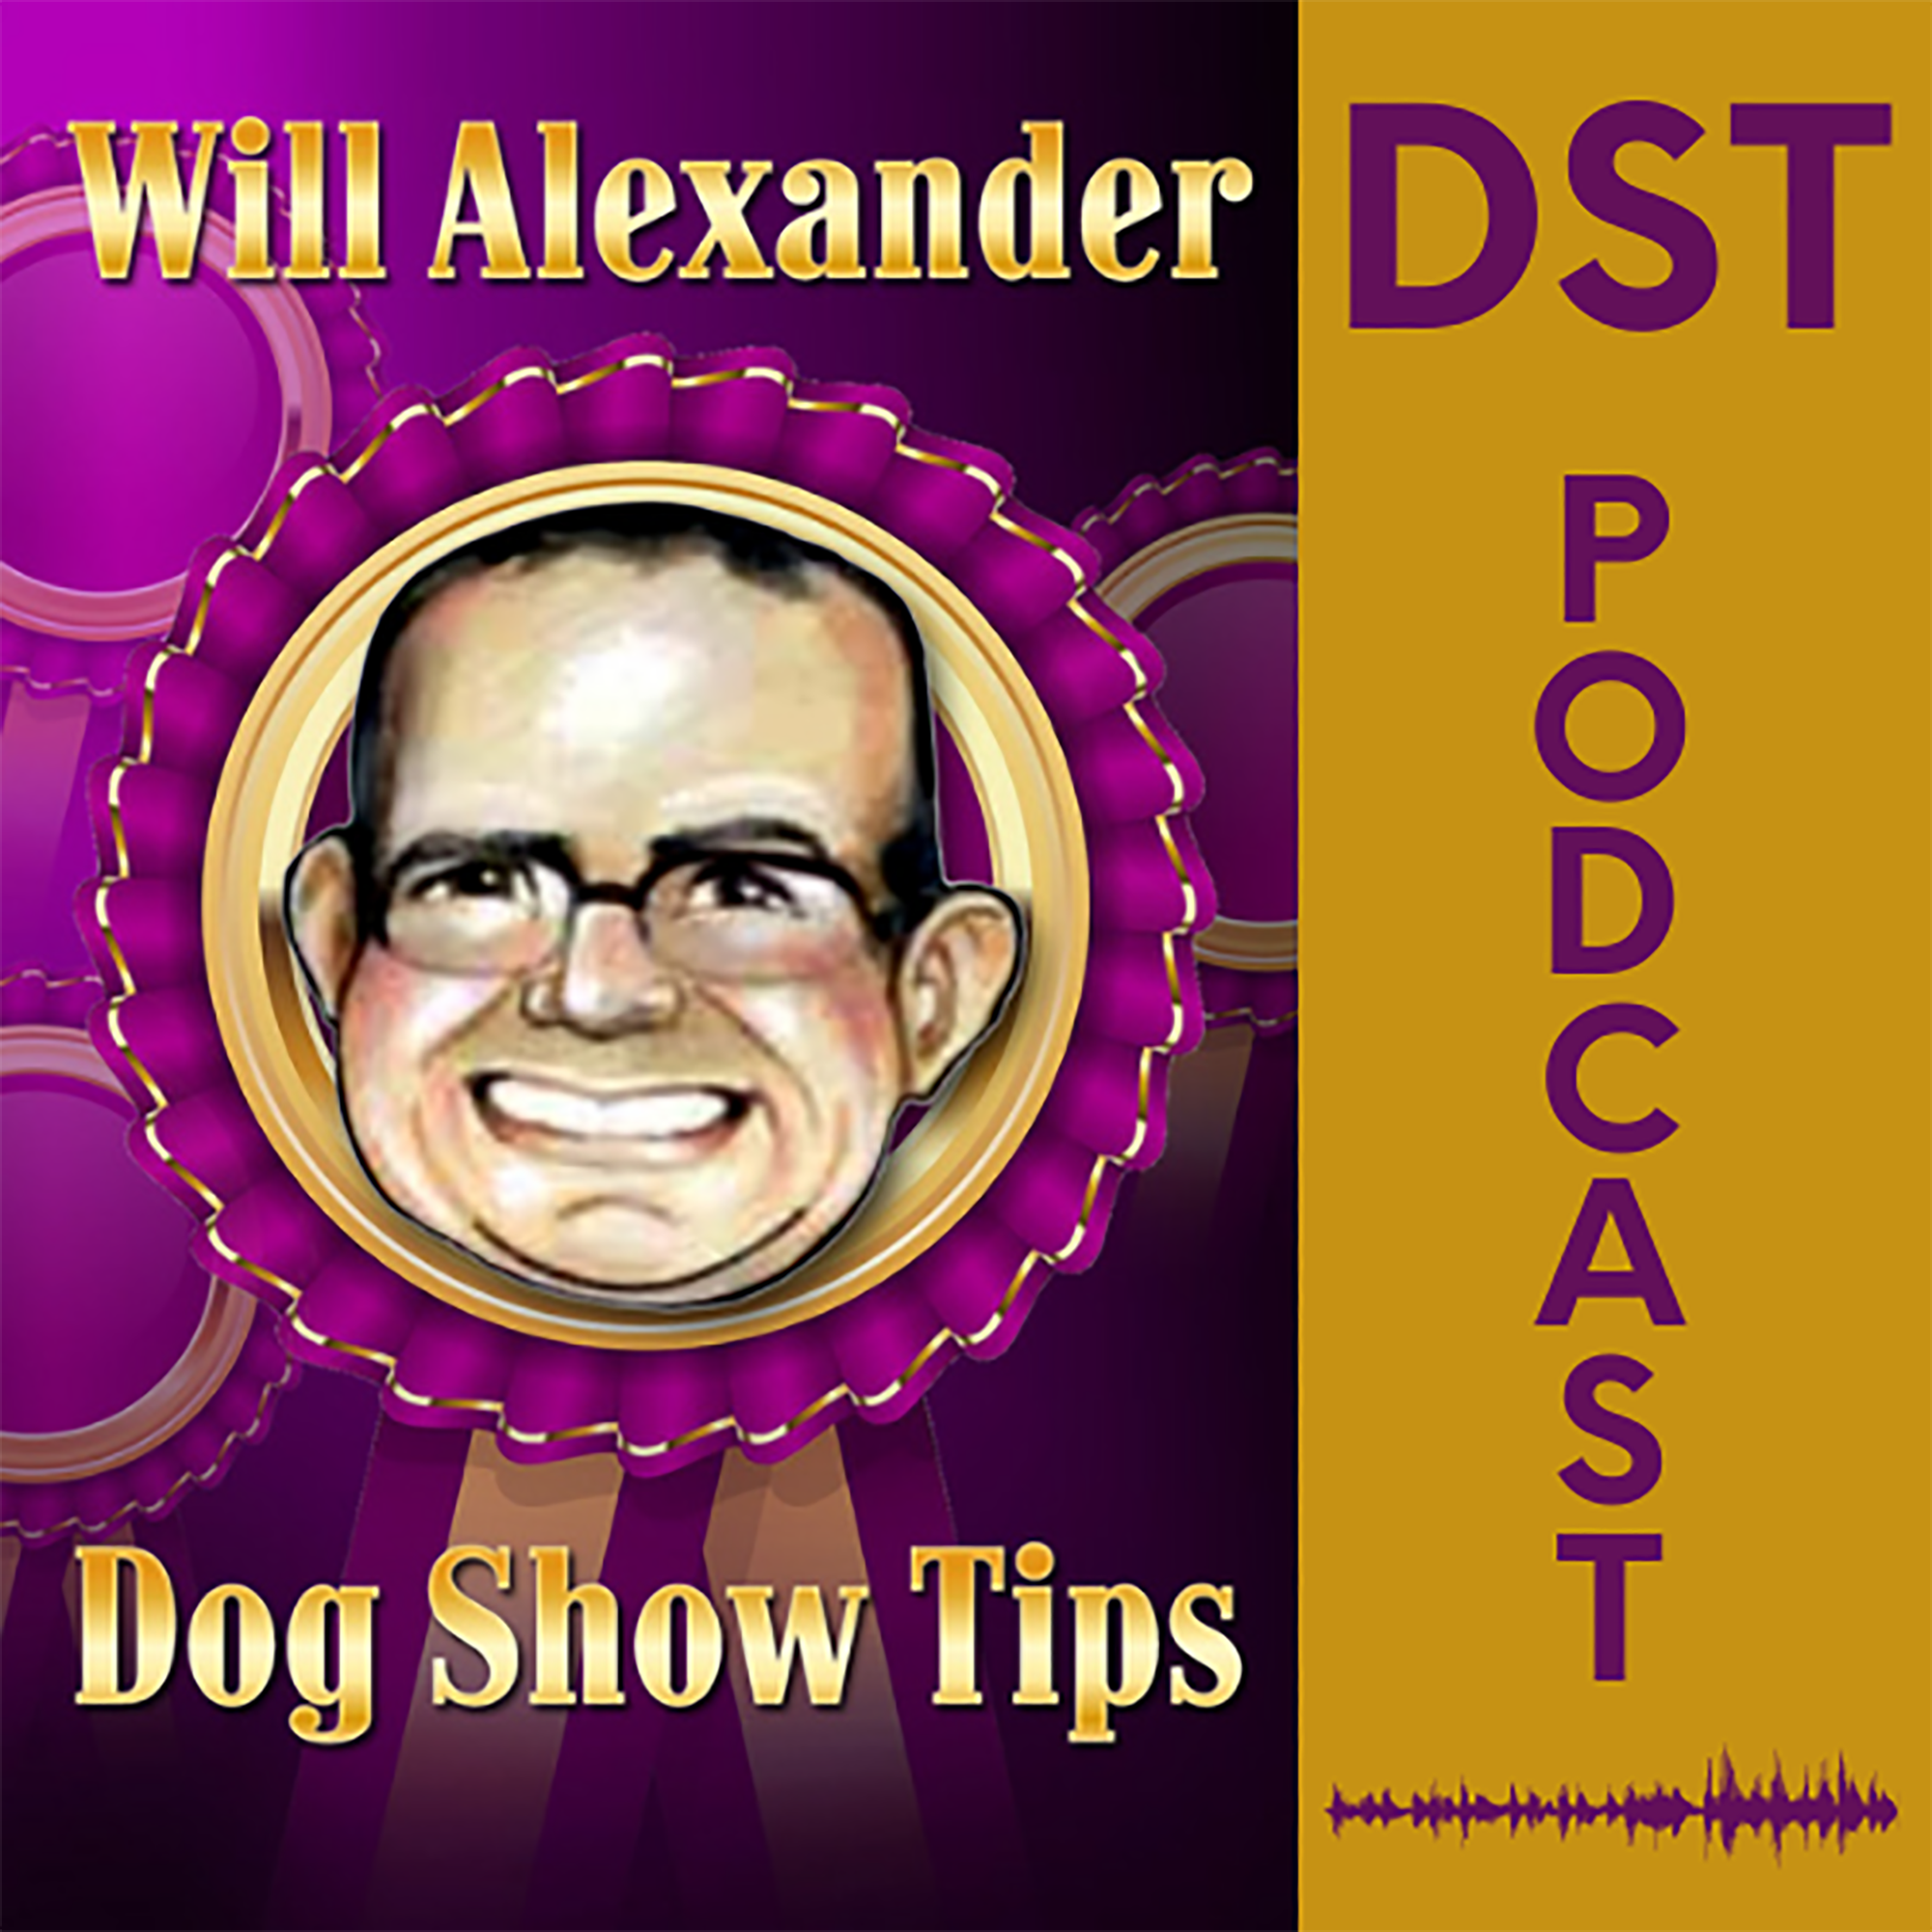 Dog Show Tips - Amy Rodrigues interview with Will Alexander